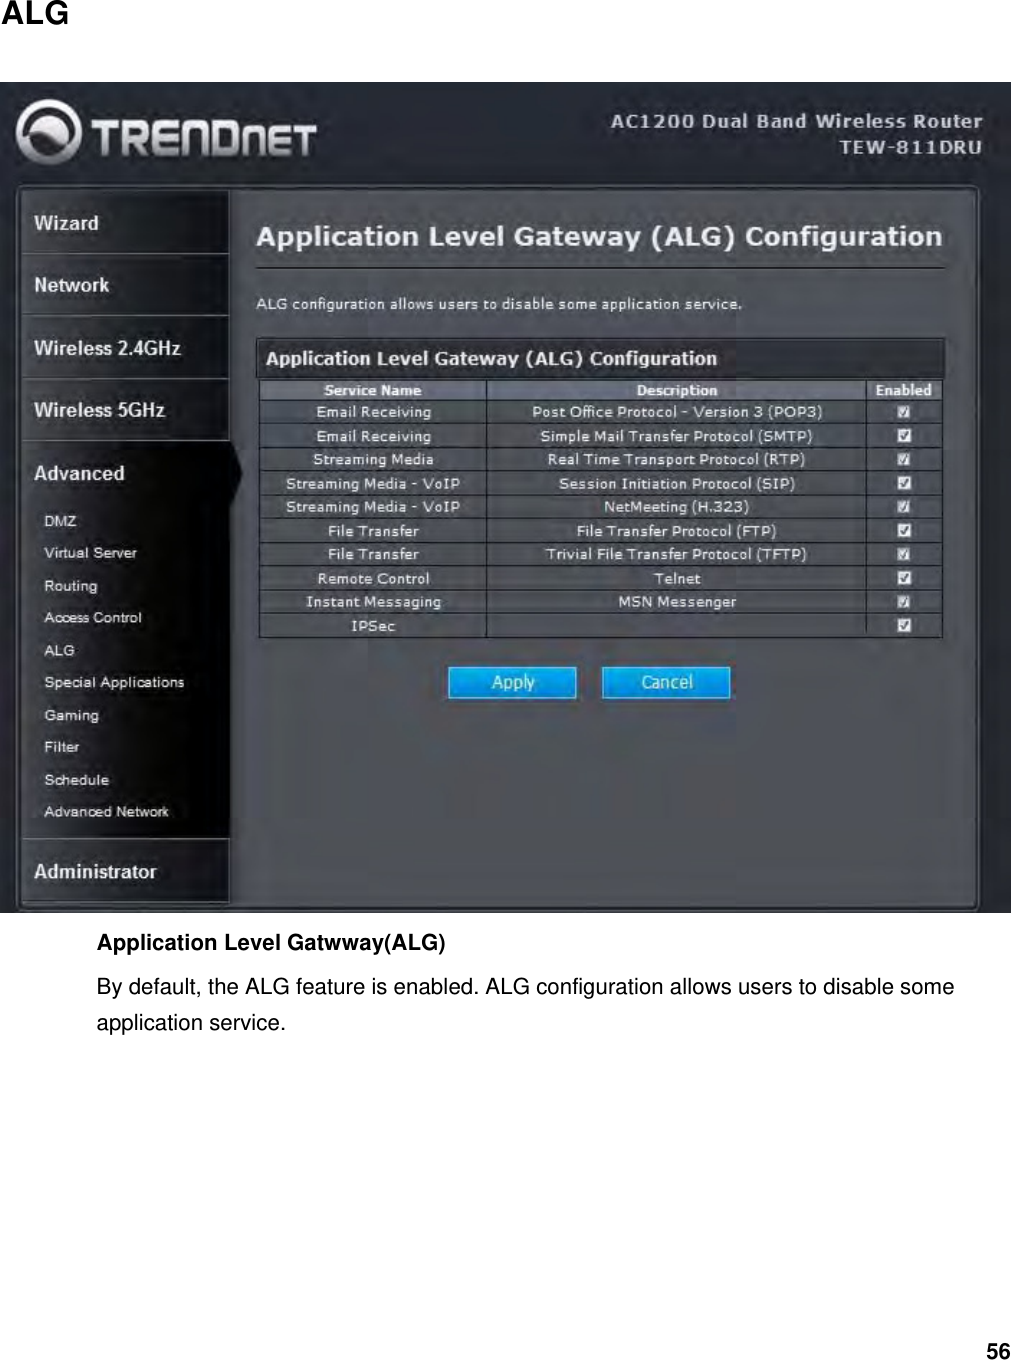 56 ALG  Application Level Gatwway(ALG) By default, the ALG feature is enabled. ALG configuration allows users to disable some application service.      